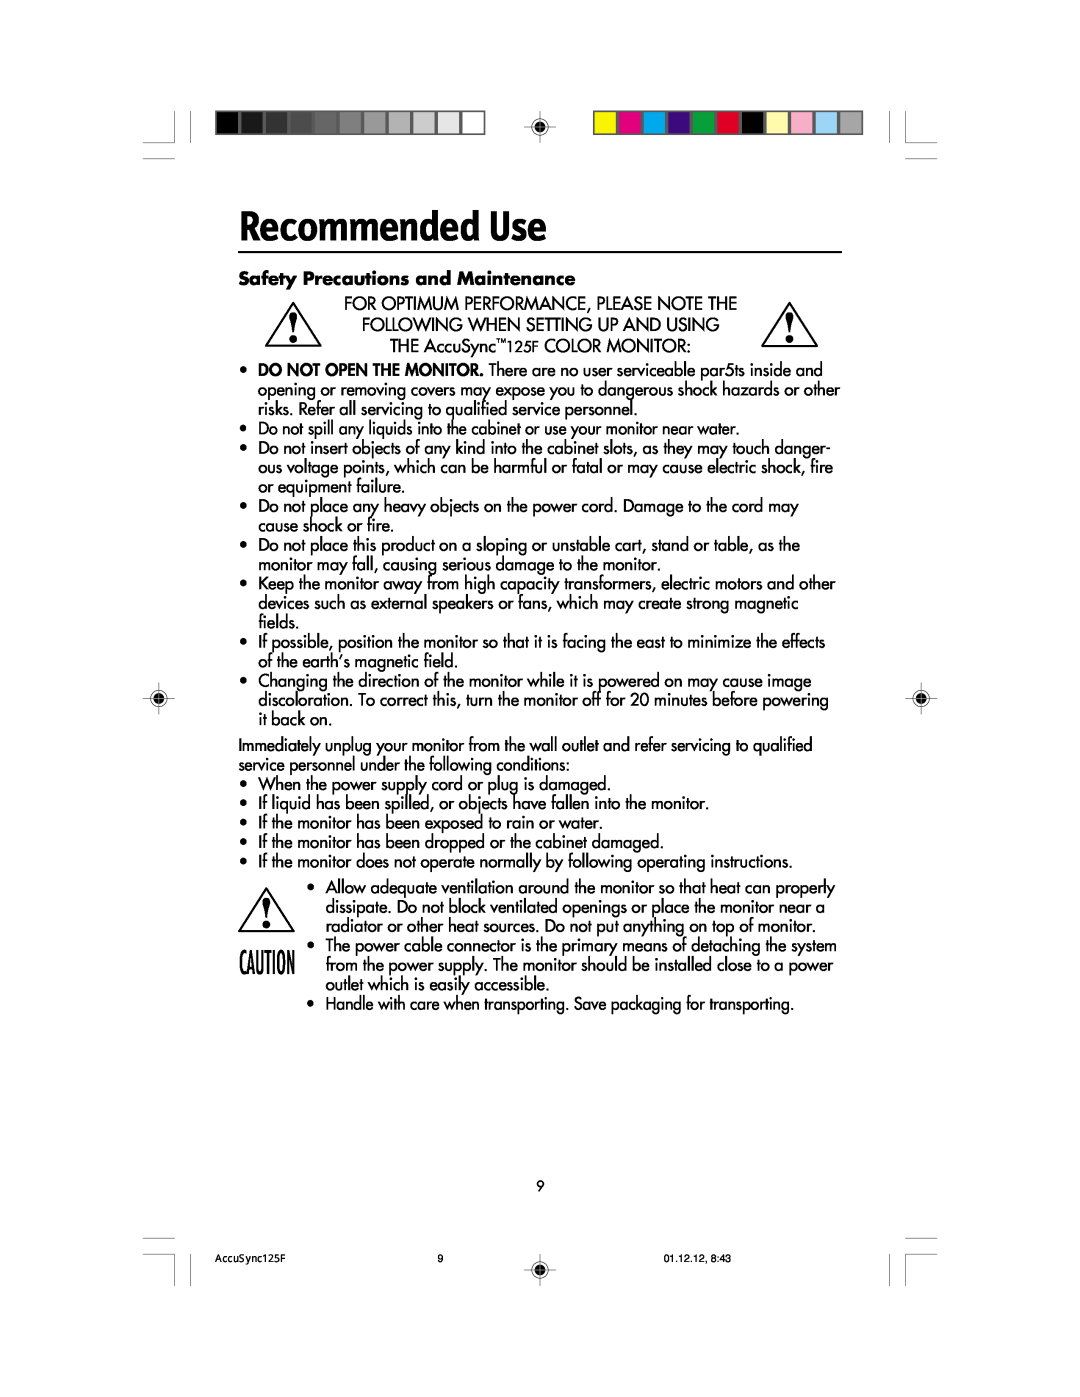 NEC 125F user manual Recommended Use, Safety Precautions and Maintenance 